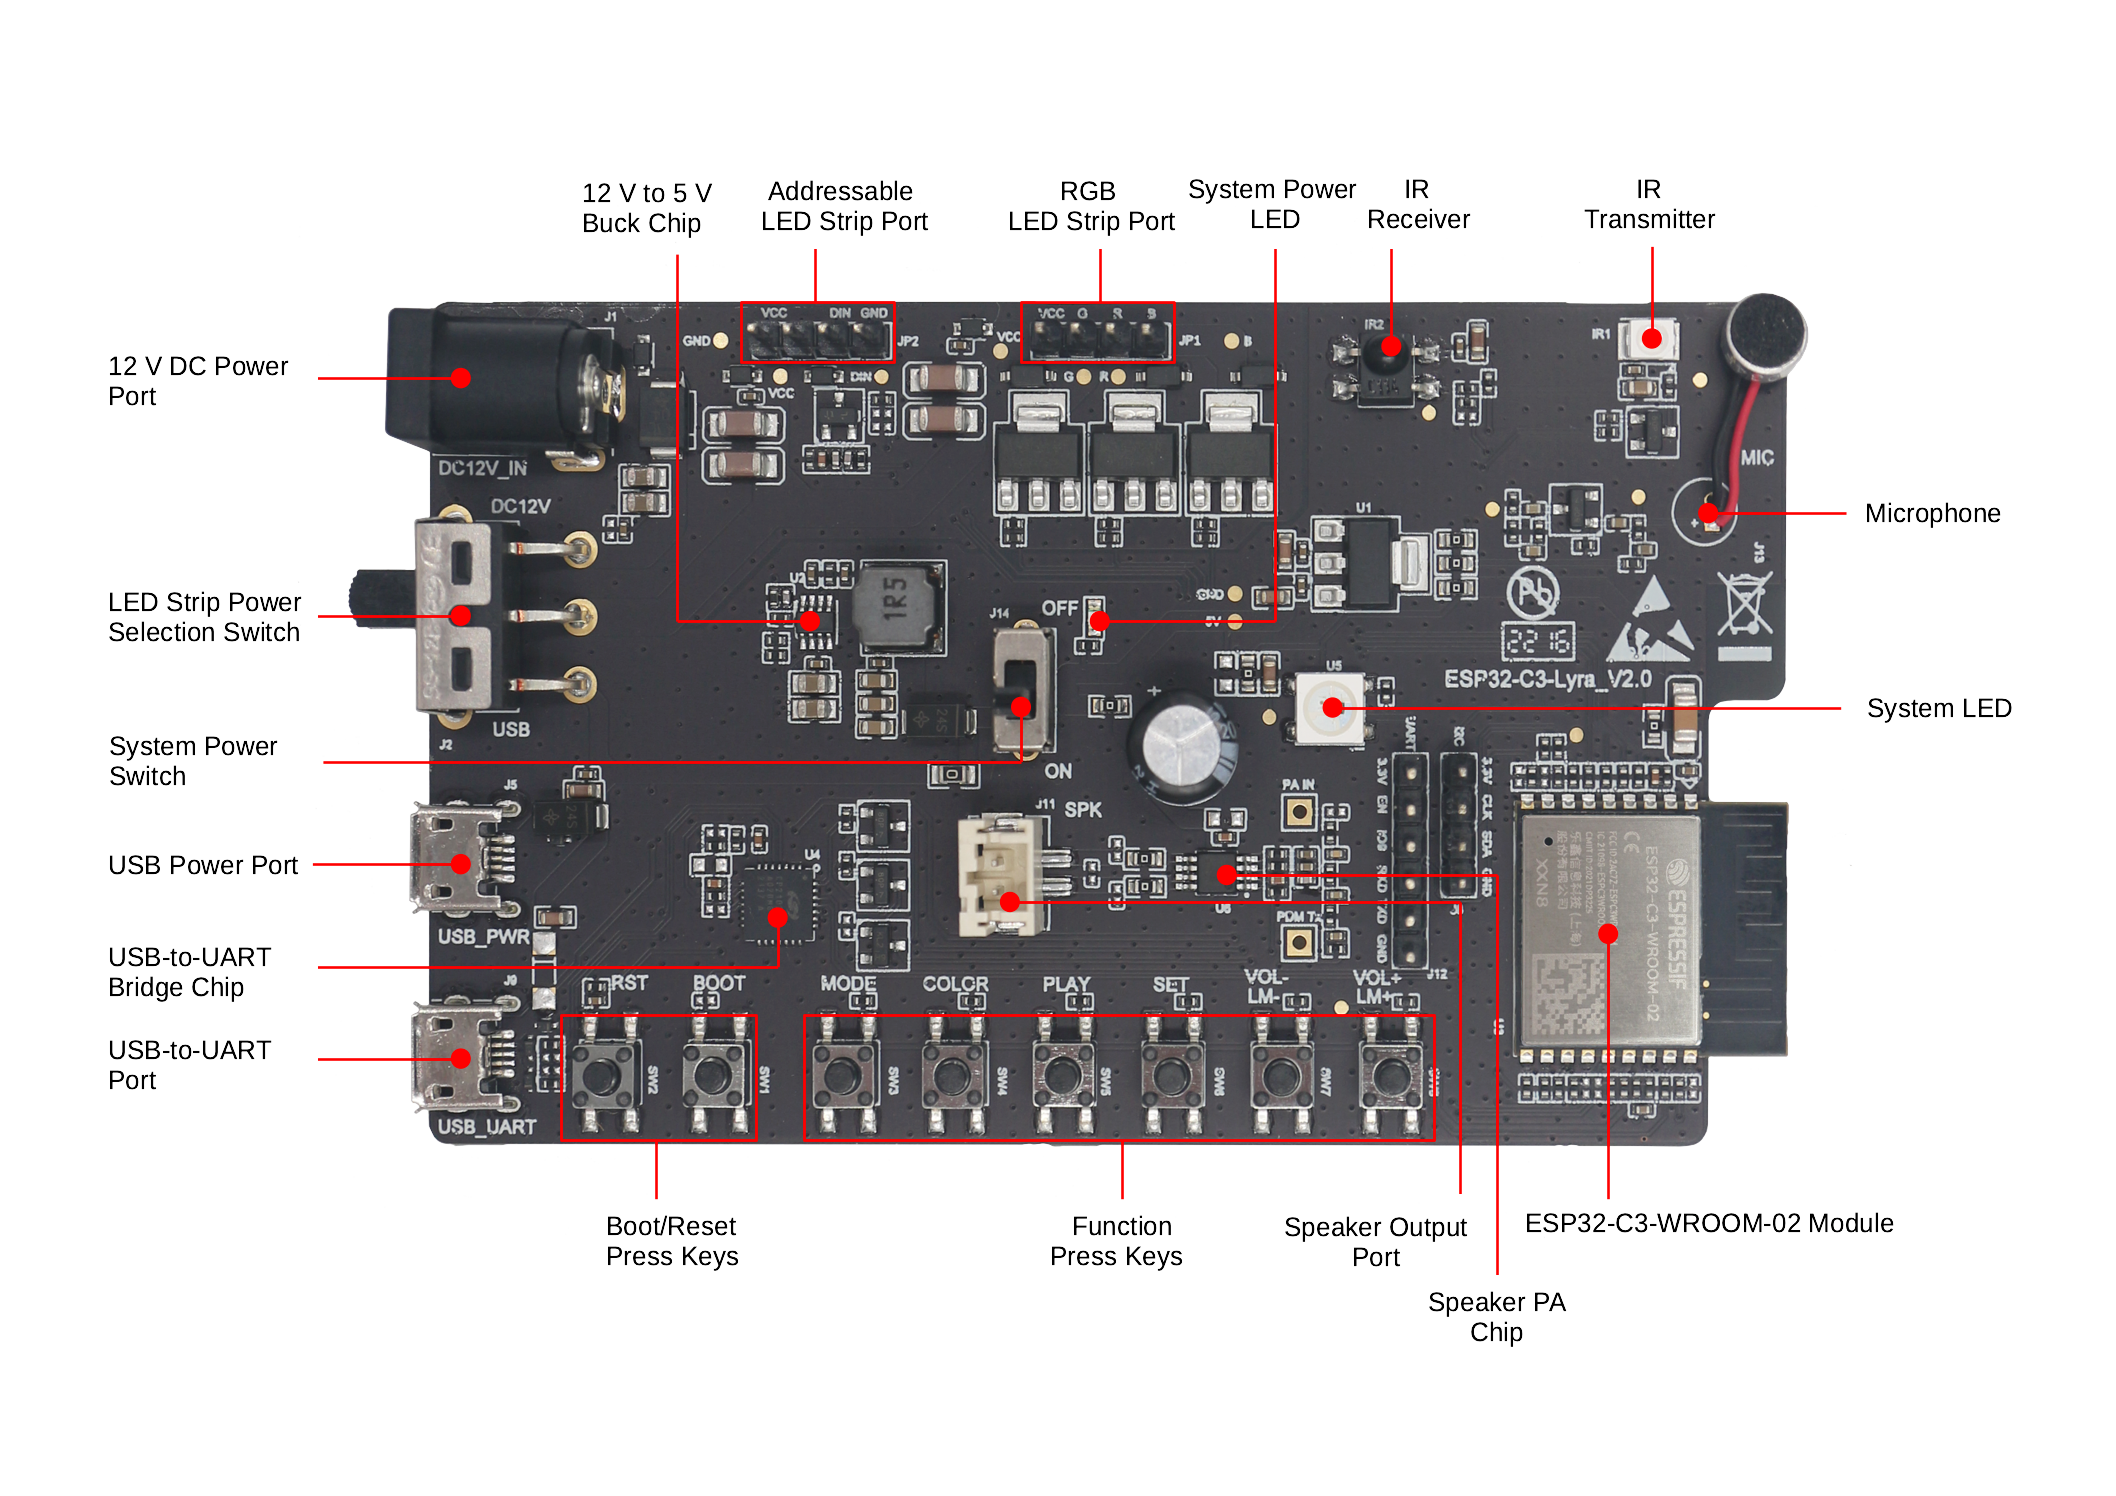 ESP32-C3-Lyra - front (click to enlarge)